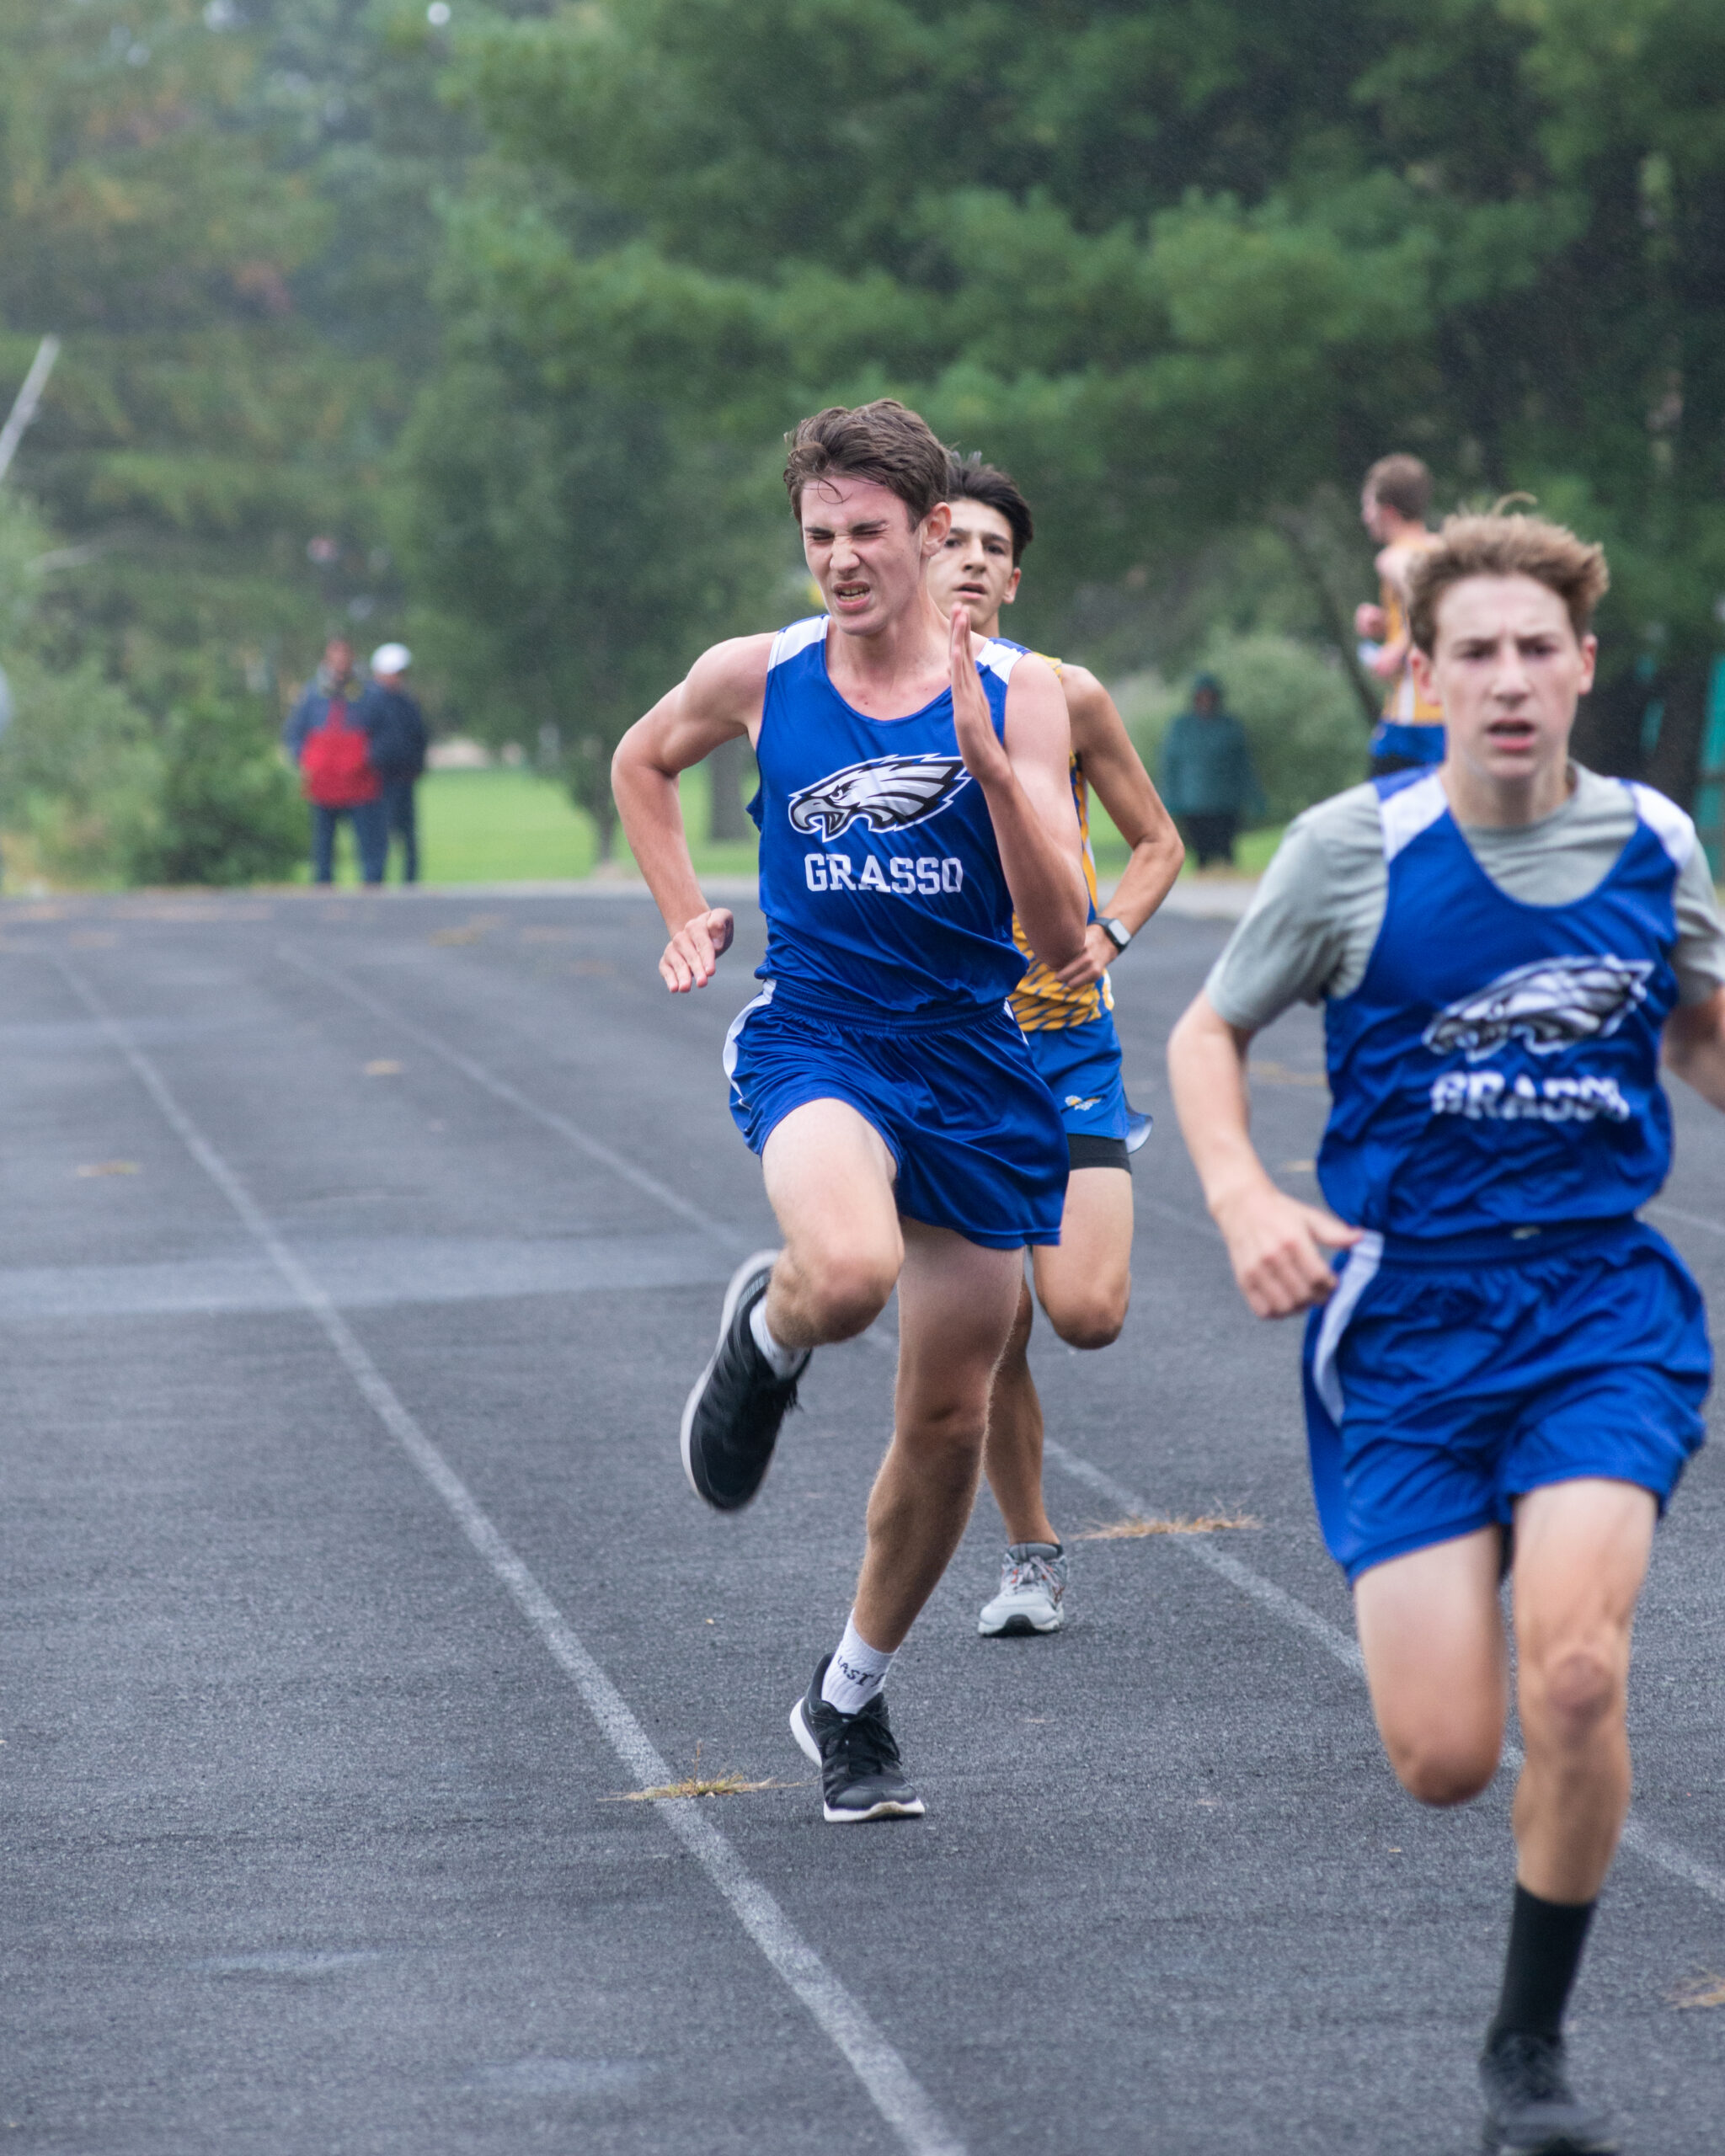 Action shot of runners taking part in a Grasso Tech boys' Cross Country meet.